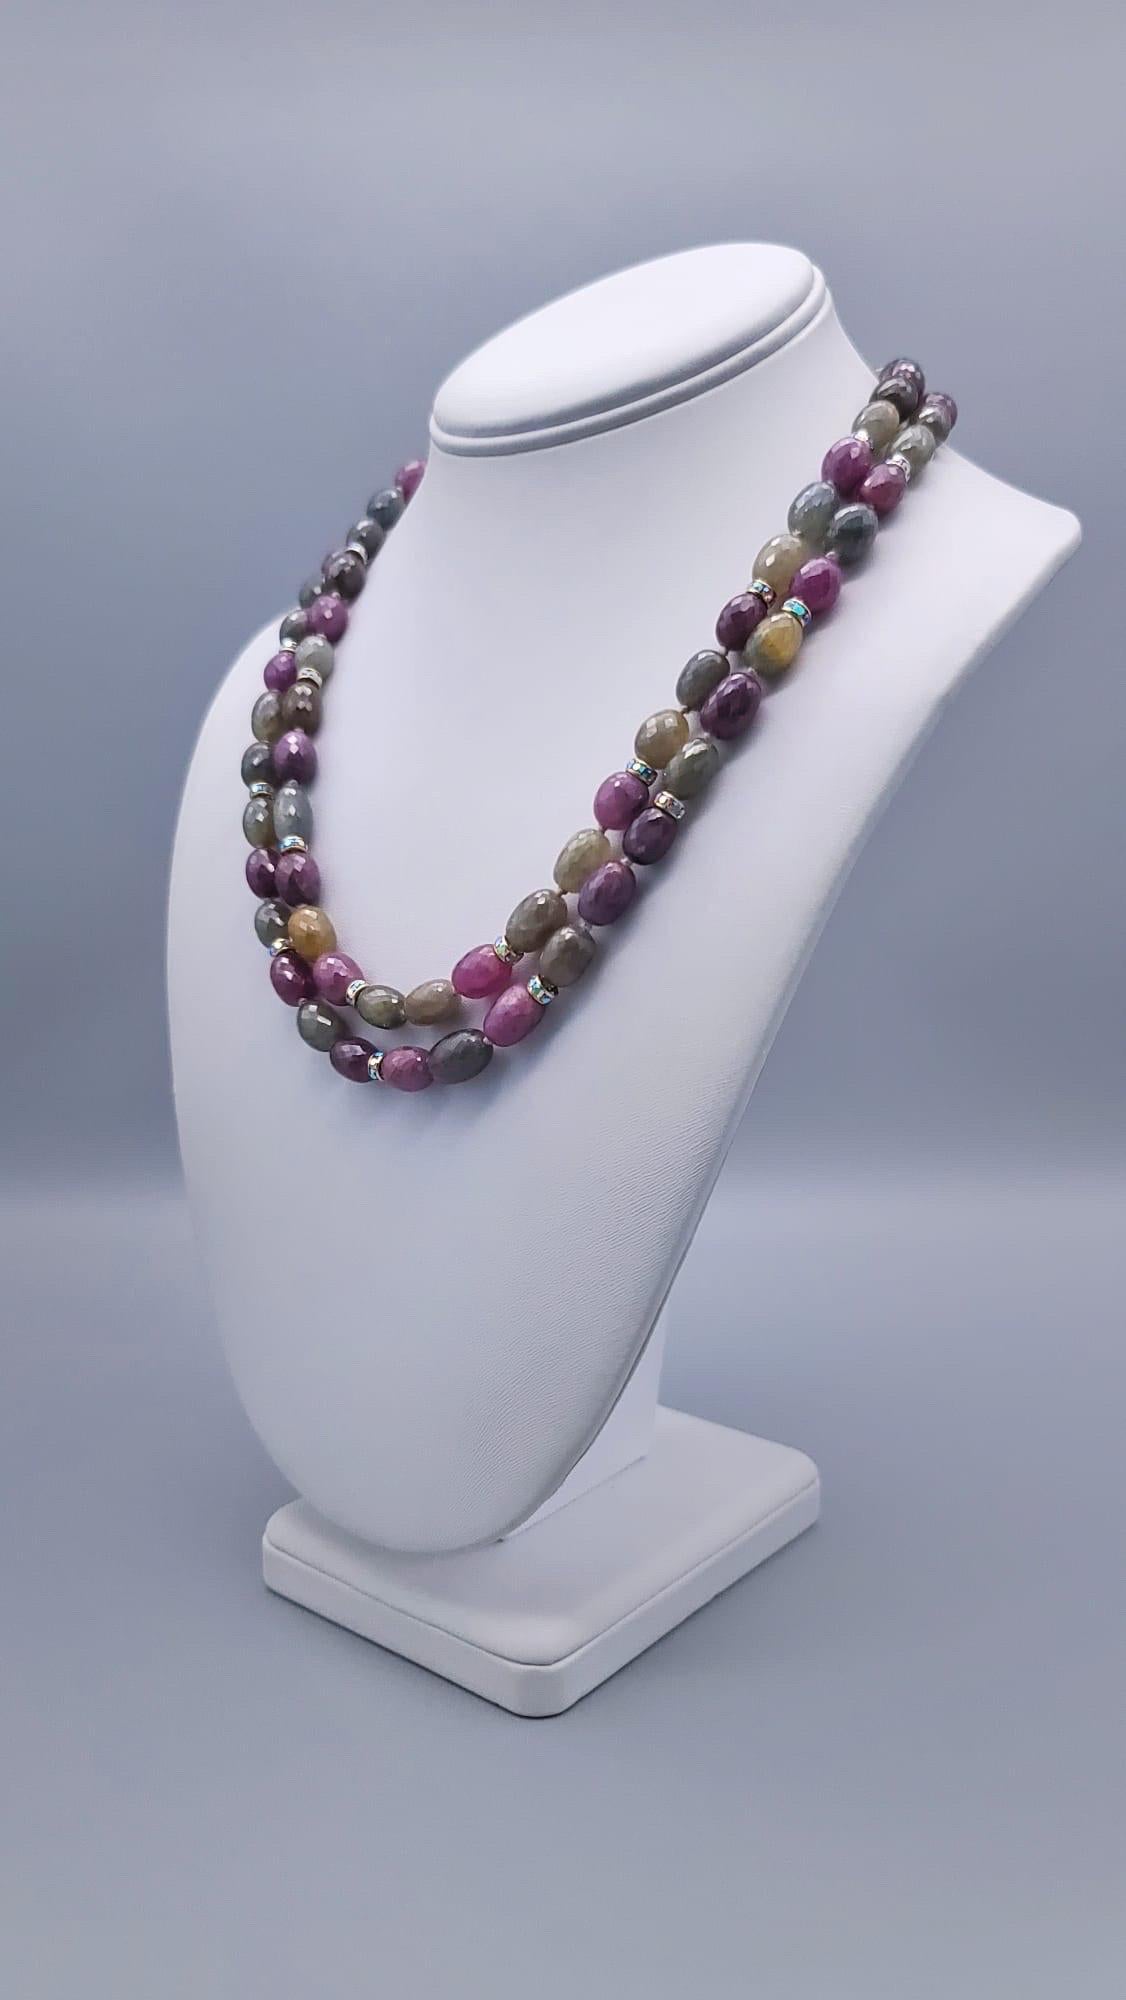 One-of-a-Kind

Just in case you always expect Sapphire to be blue here is a double strand of rich green and pink faceted sapphires nested together with CZ rondels for added brightness. The beads are hand-knotted with silk. The clasp is vermeil with